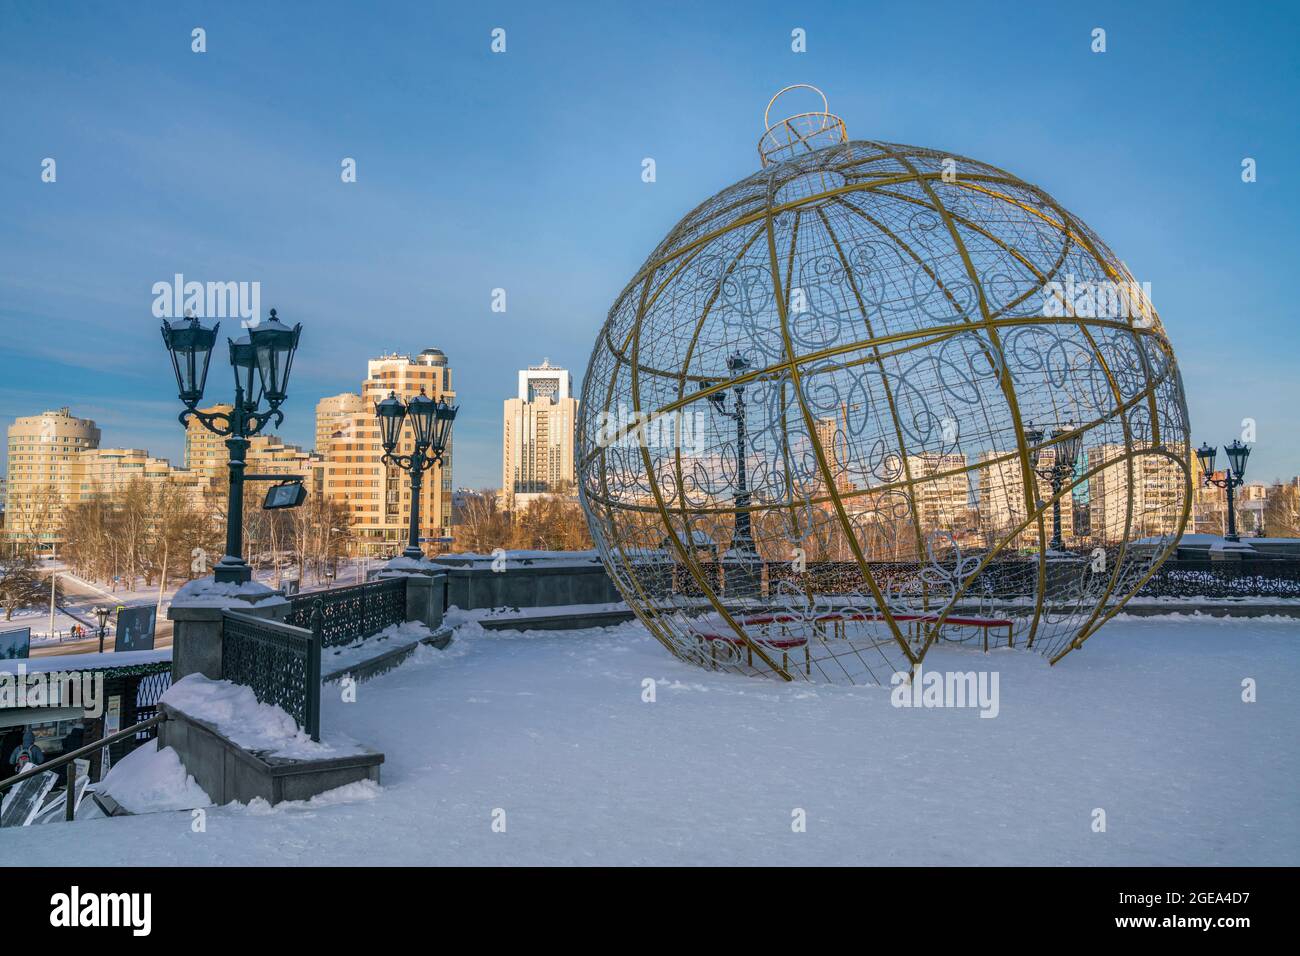 New Years decorations surrounding the Church of All Saints at Ekaterinburg in Russia. Stock Photo